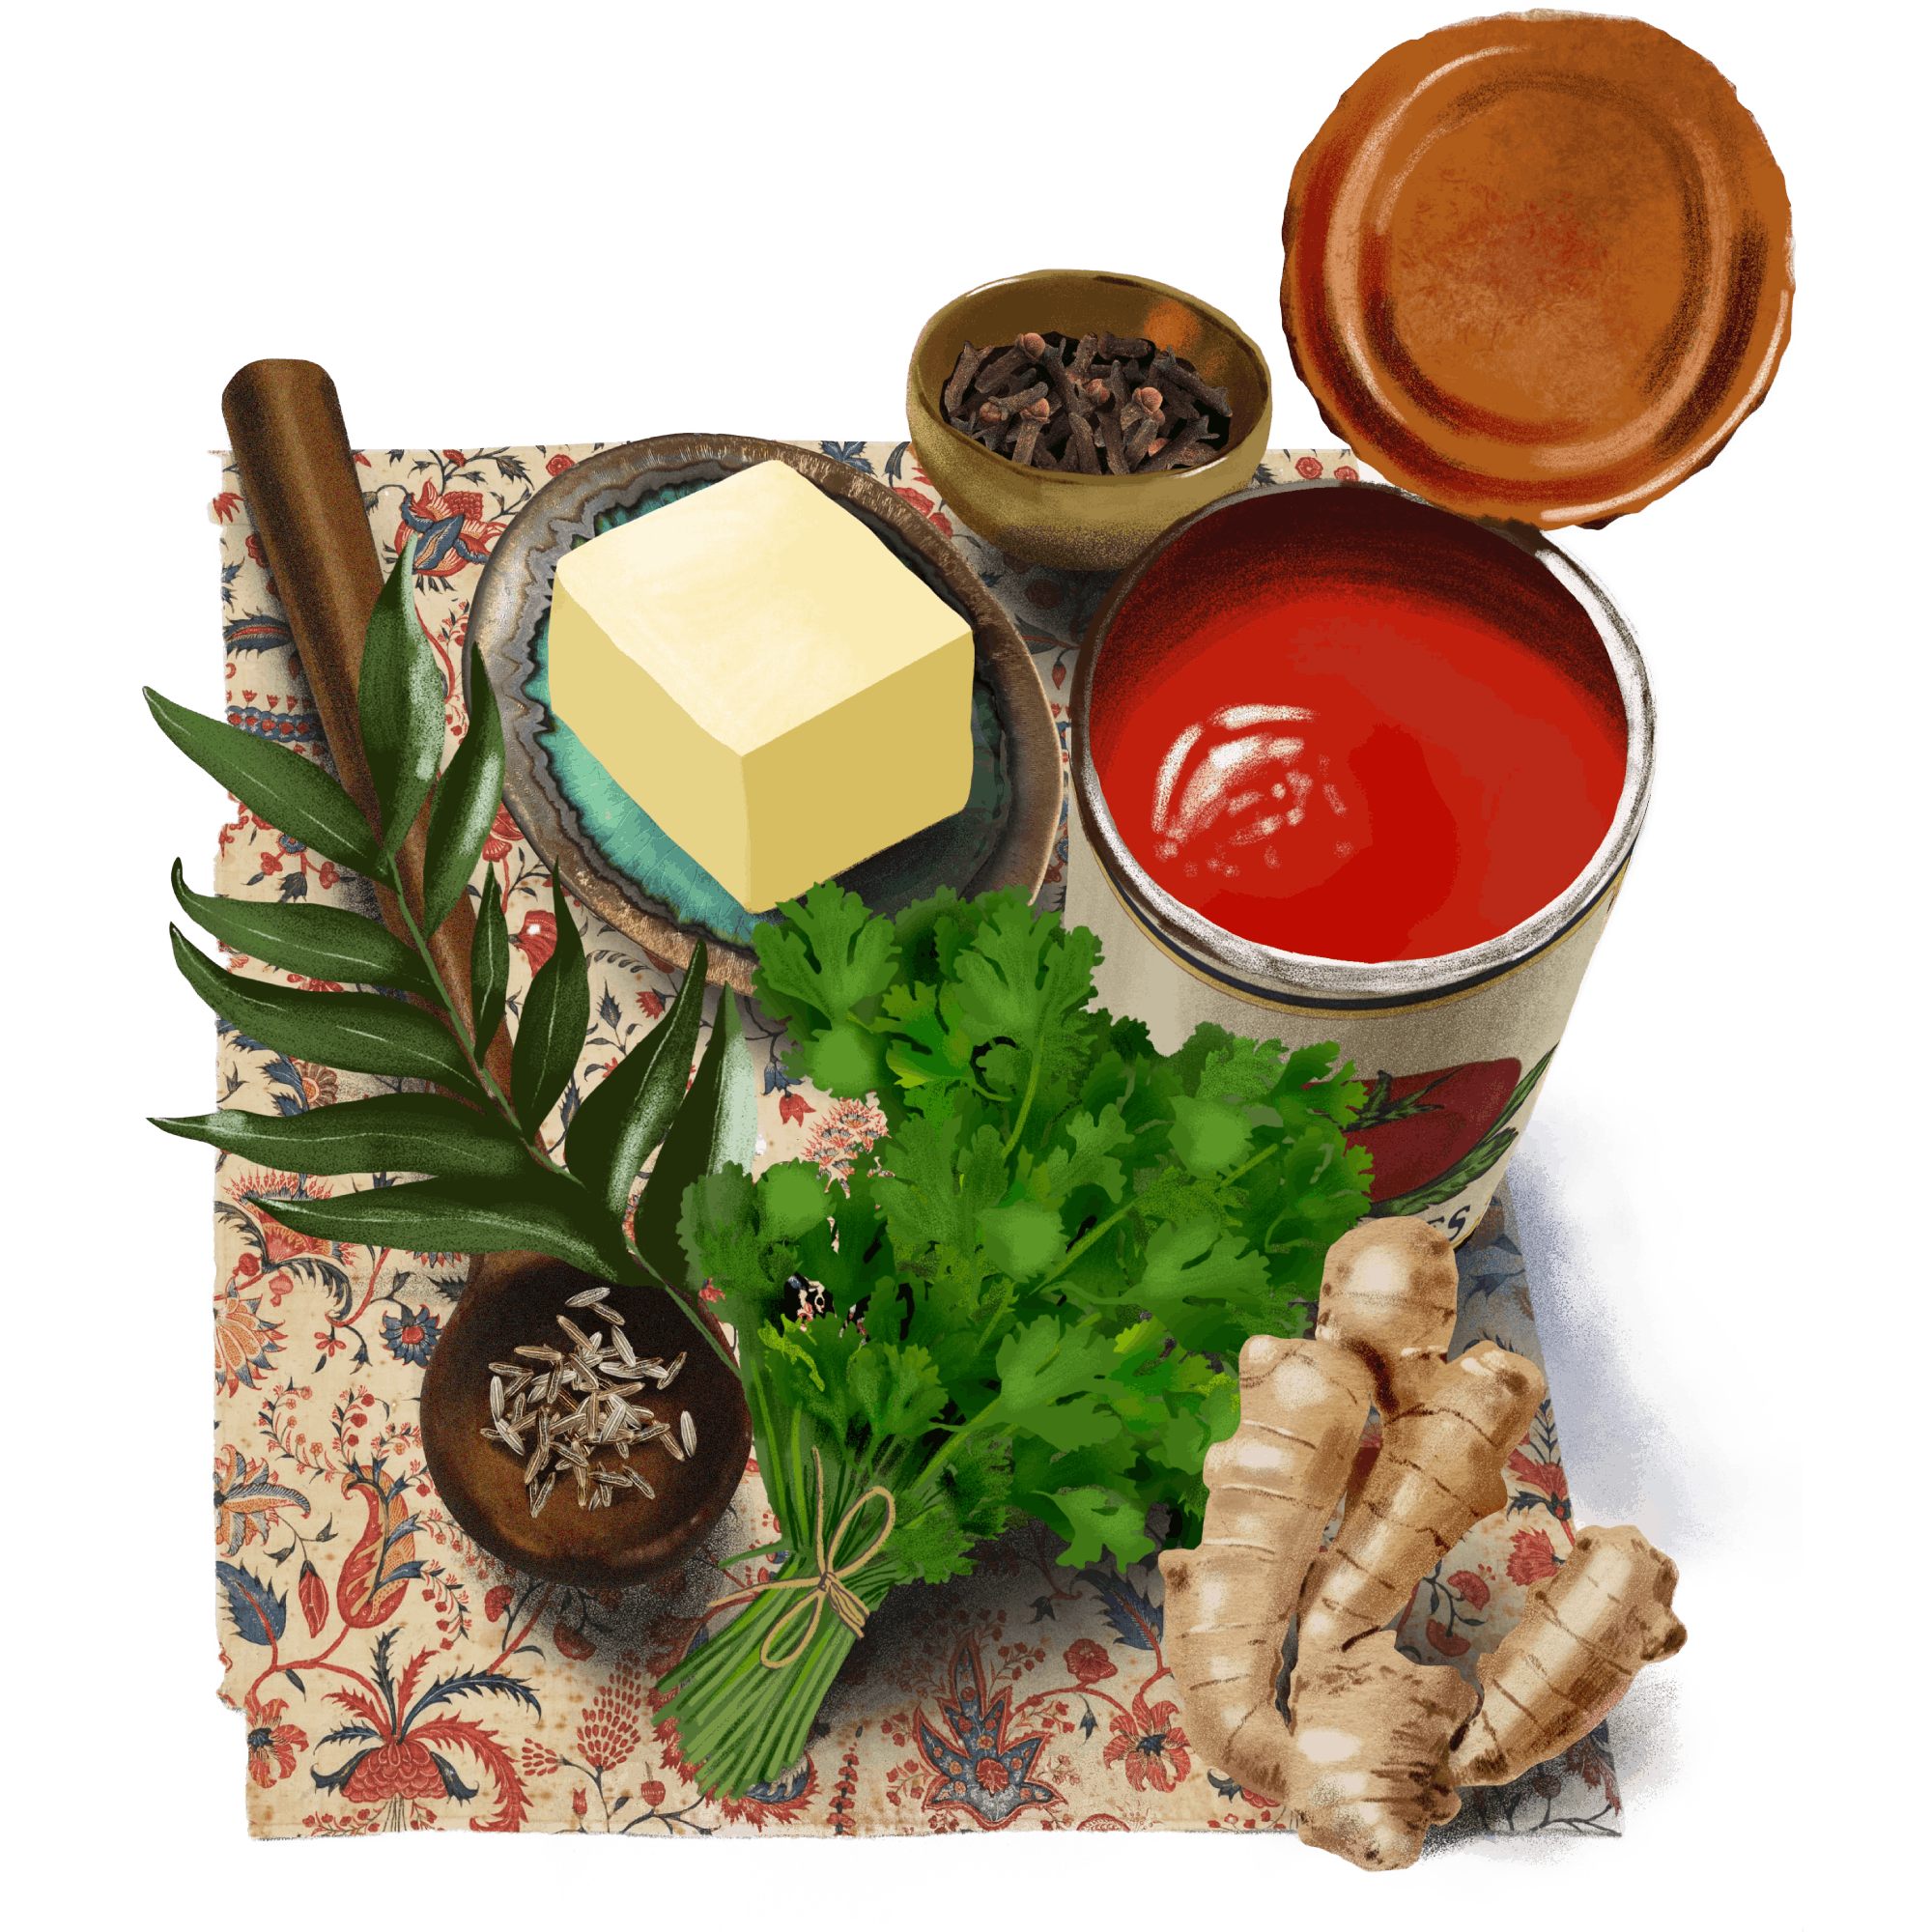 An illustration of the ingredients for Chef Preeti Mistry’s tomato soup, among them a bunch of cilantro, some ginger, a large stick of butter, and canned tomato.